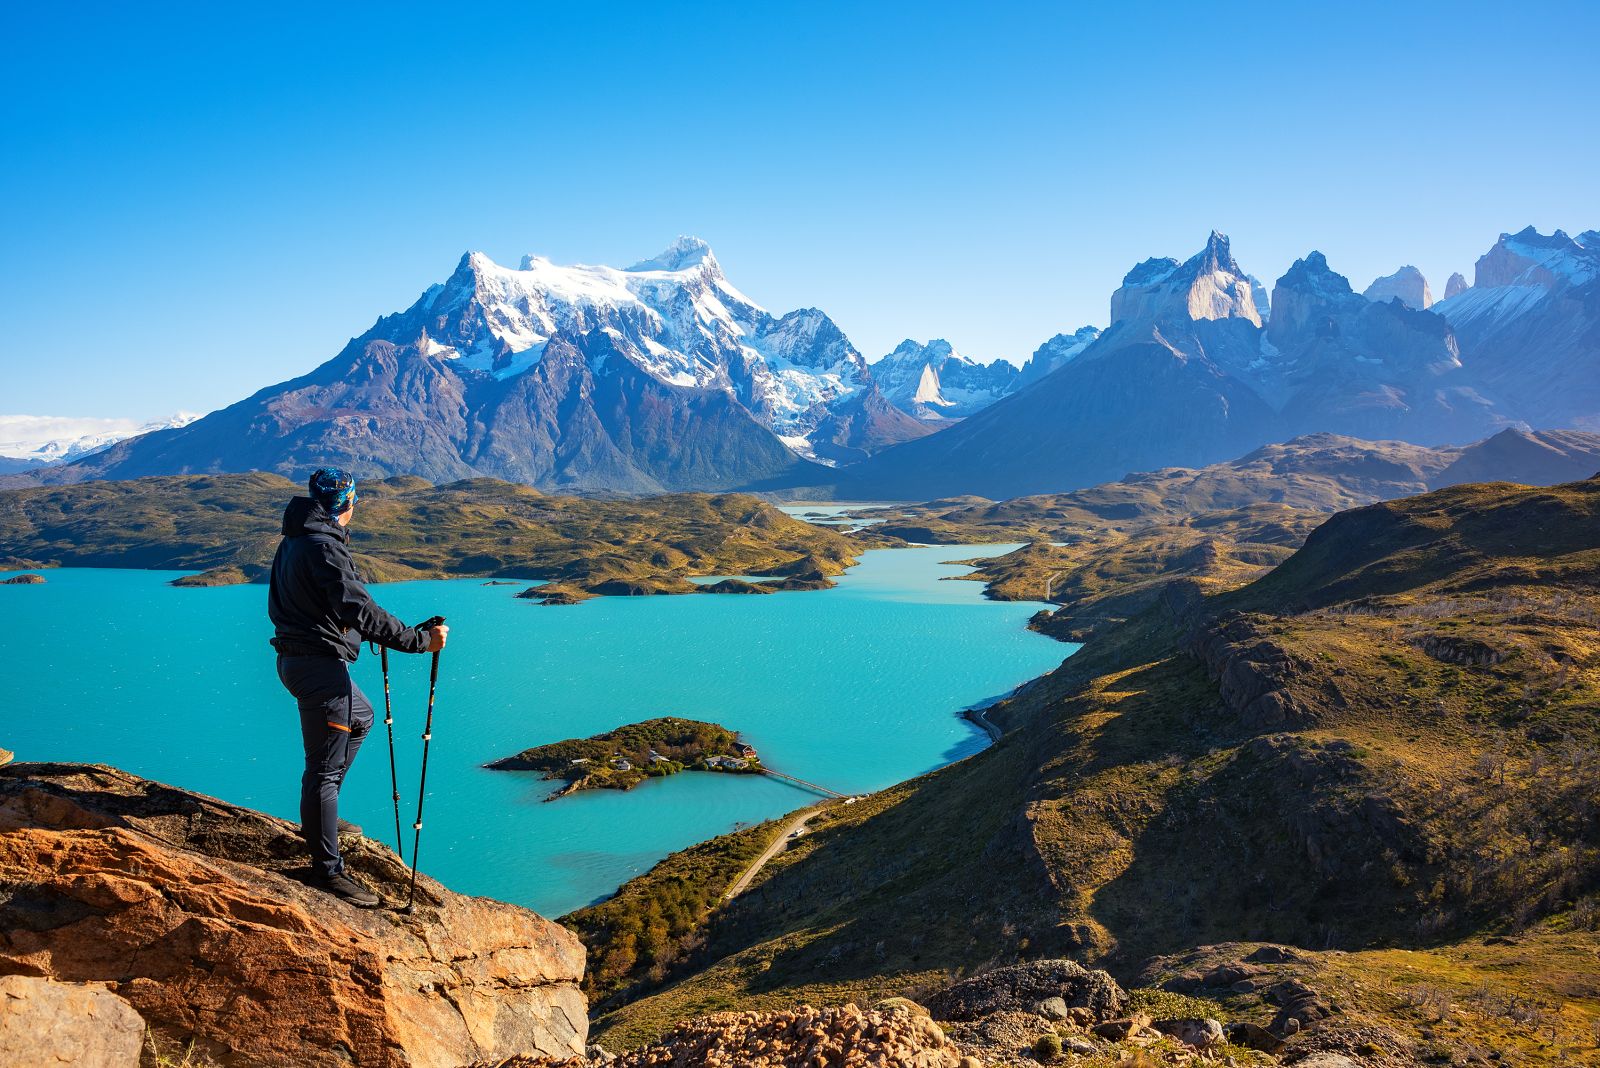 A hiker looking out over a dazzling turquoise lake and the Torres del Paine horns in Patagonia Chile